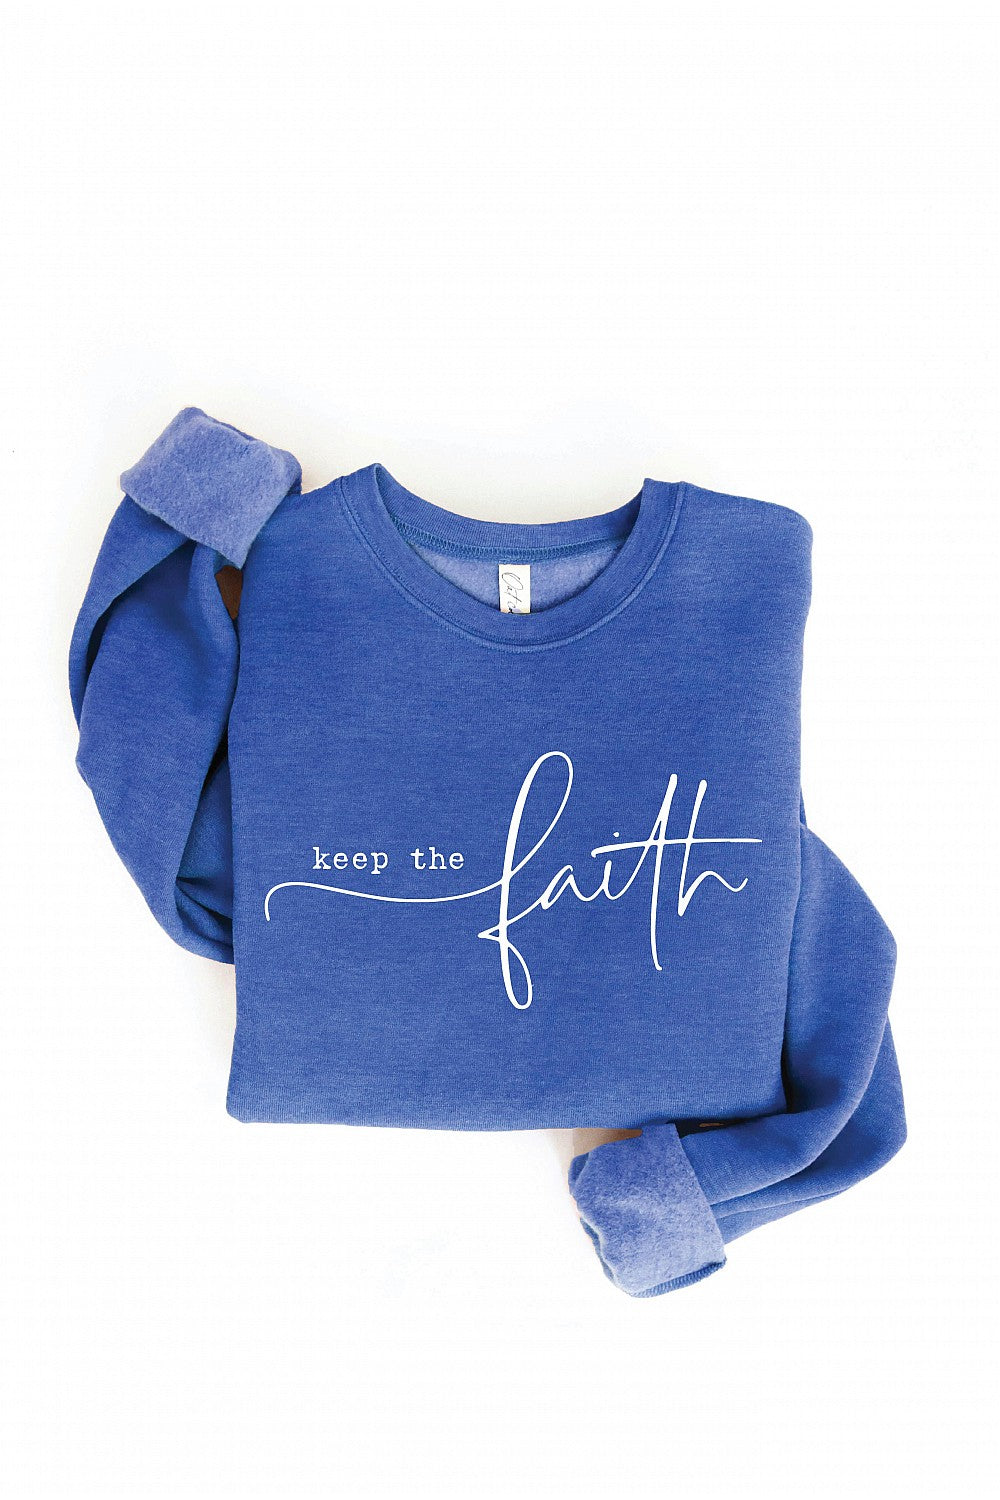  52% cotton / 40% polyester / 8% rayon  Keep The Faith- this gorgeous royal blue top is a favorite mantra of many! This ultra comfy fleecy pullover features a ribbed cuff & crew neck, it's great for layering or rocking solo. Psst: Check the size guide on the chest for the perfect fit.